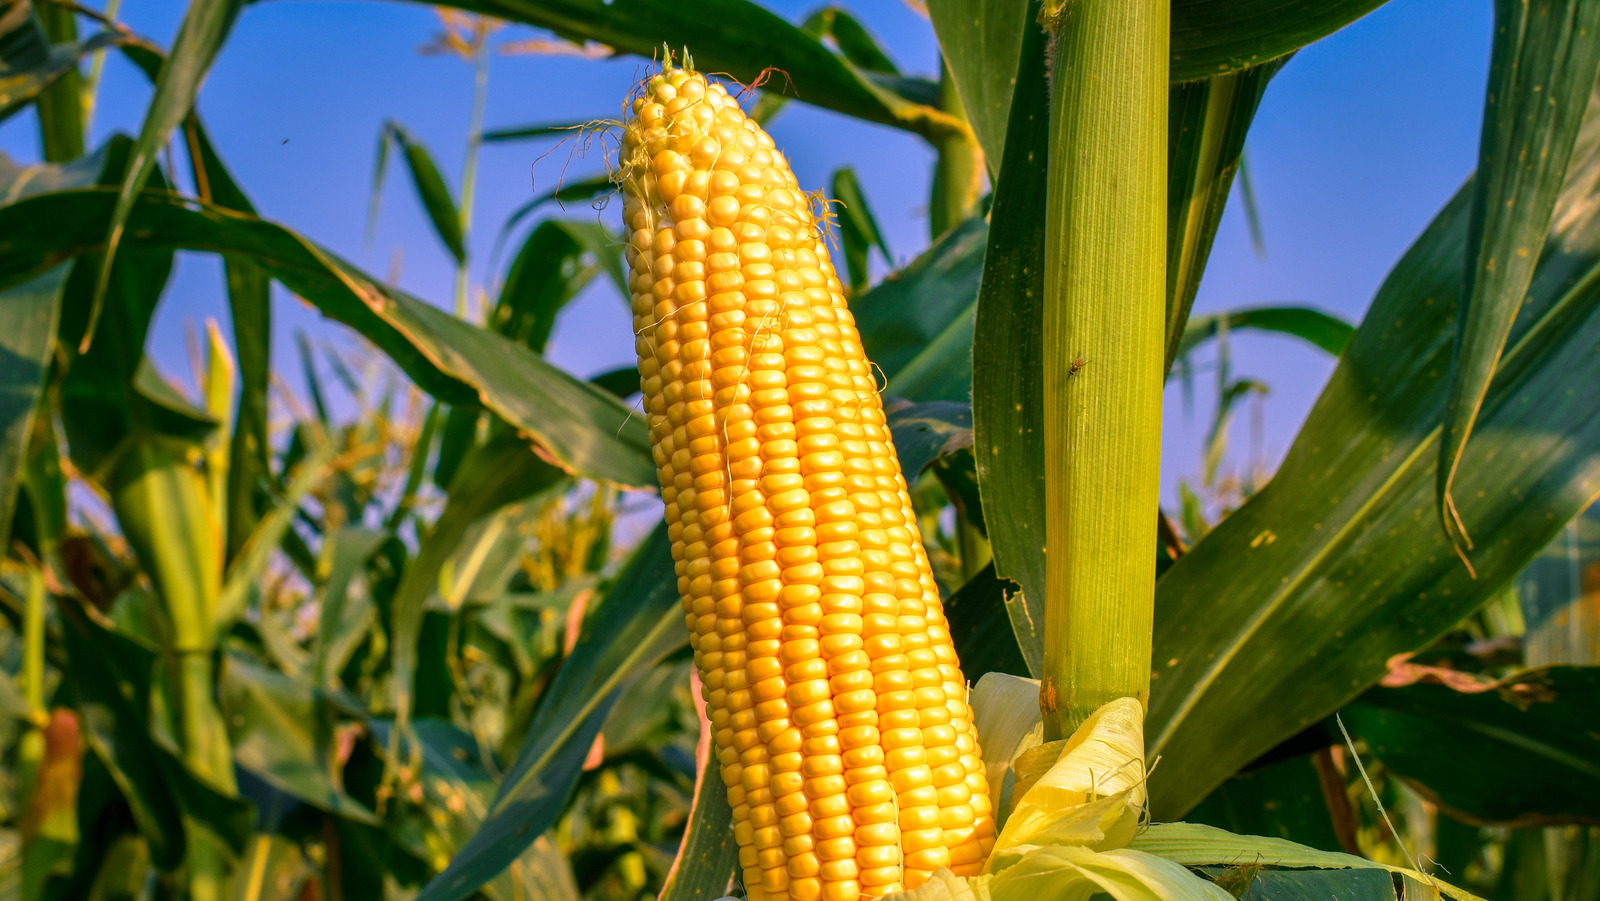 https://www.tastingtable.com/img/gallery/why-the-upcoming-us-corn-harvest-will-be-a-major-disappointment/l-intro-1661798225.jpg